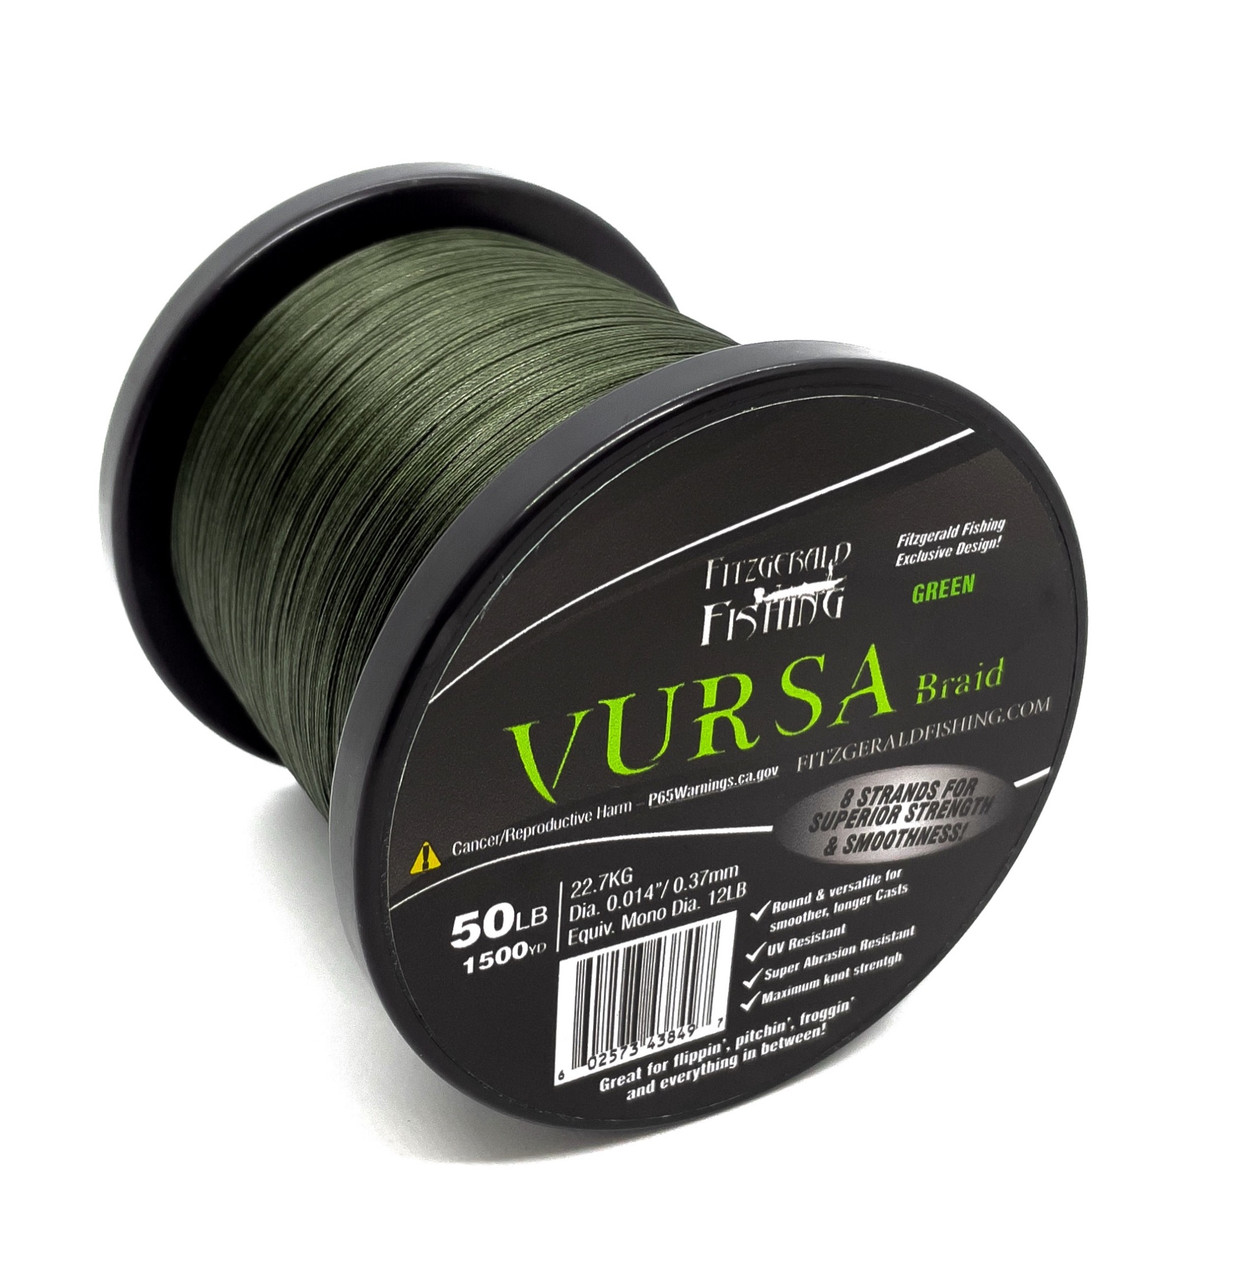  Fitzgerald Vursa 4X Braided Fishing Line - The 4 Strand,  Longer Casting, Fade Resistant Freshwater and Saltwater Fishing Line -  Available in Green and Yellow, 150/300/1500 Yd, 10-120 Lb : Sports &  Outdoors